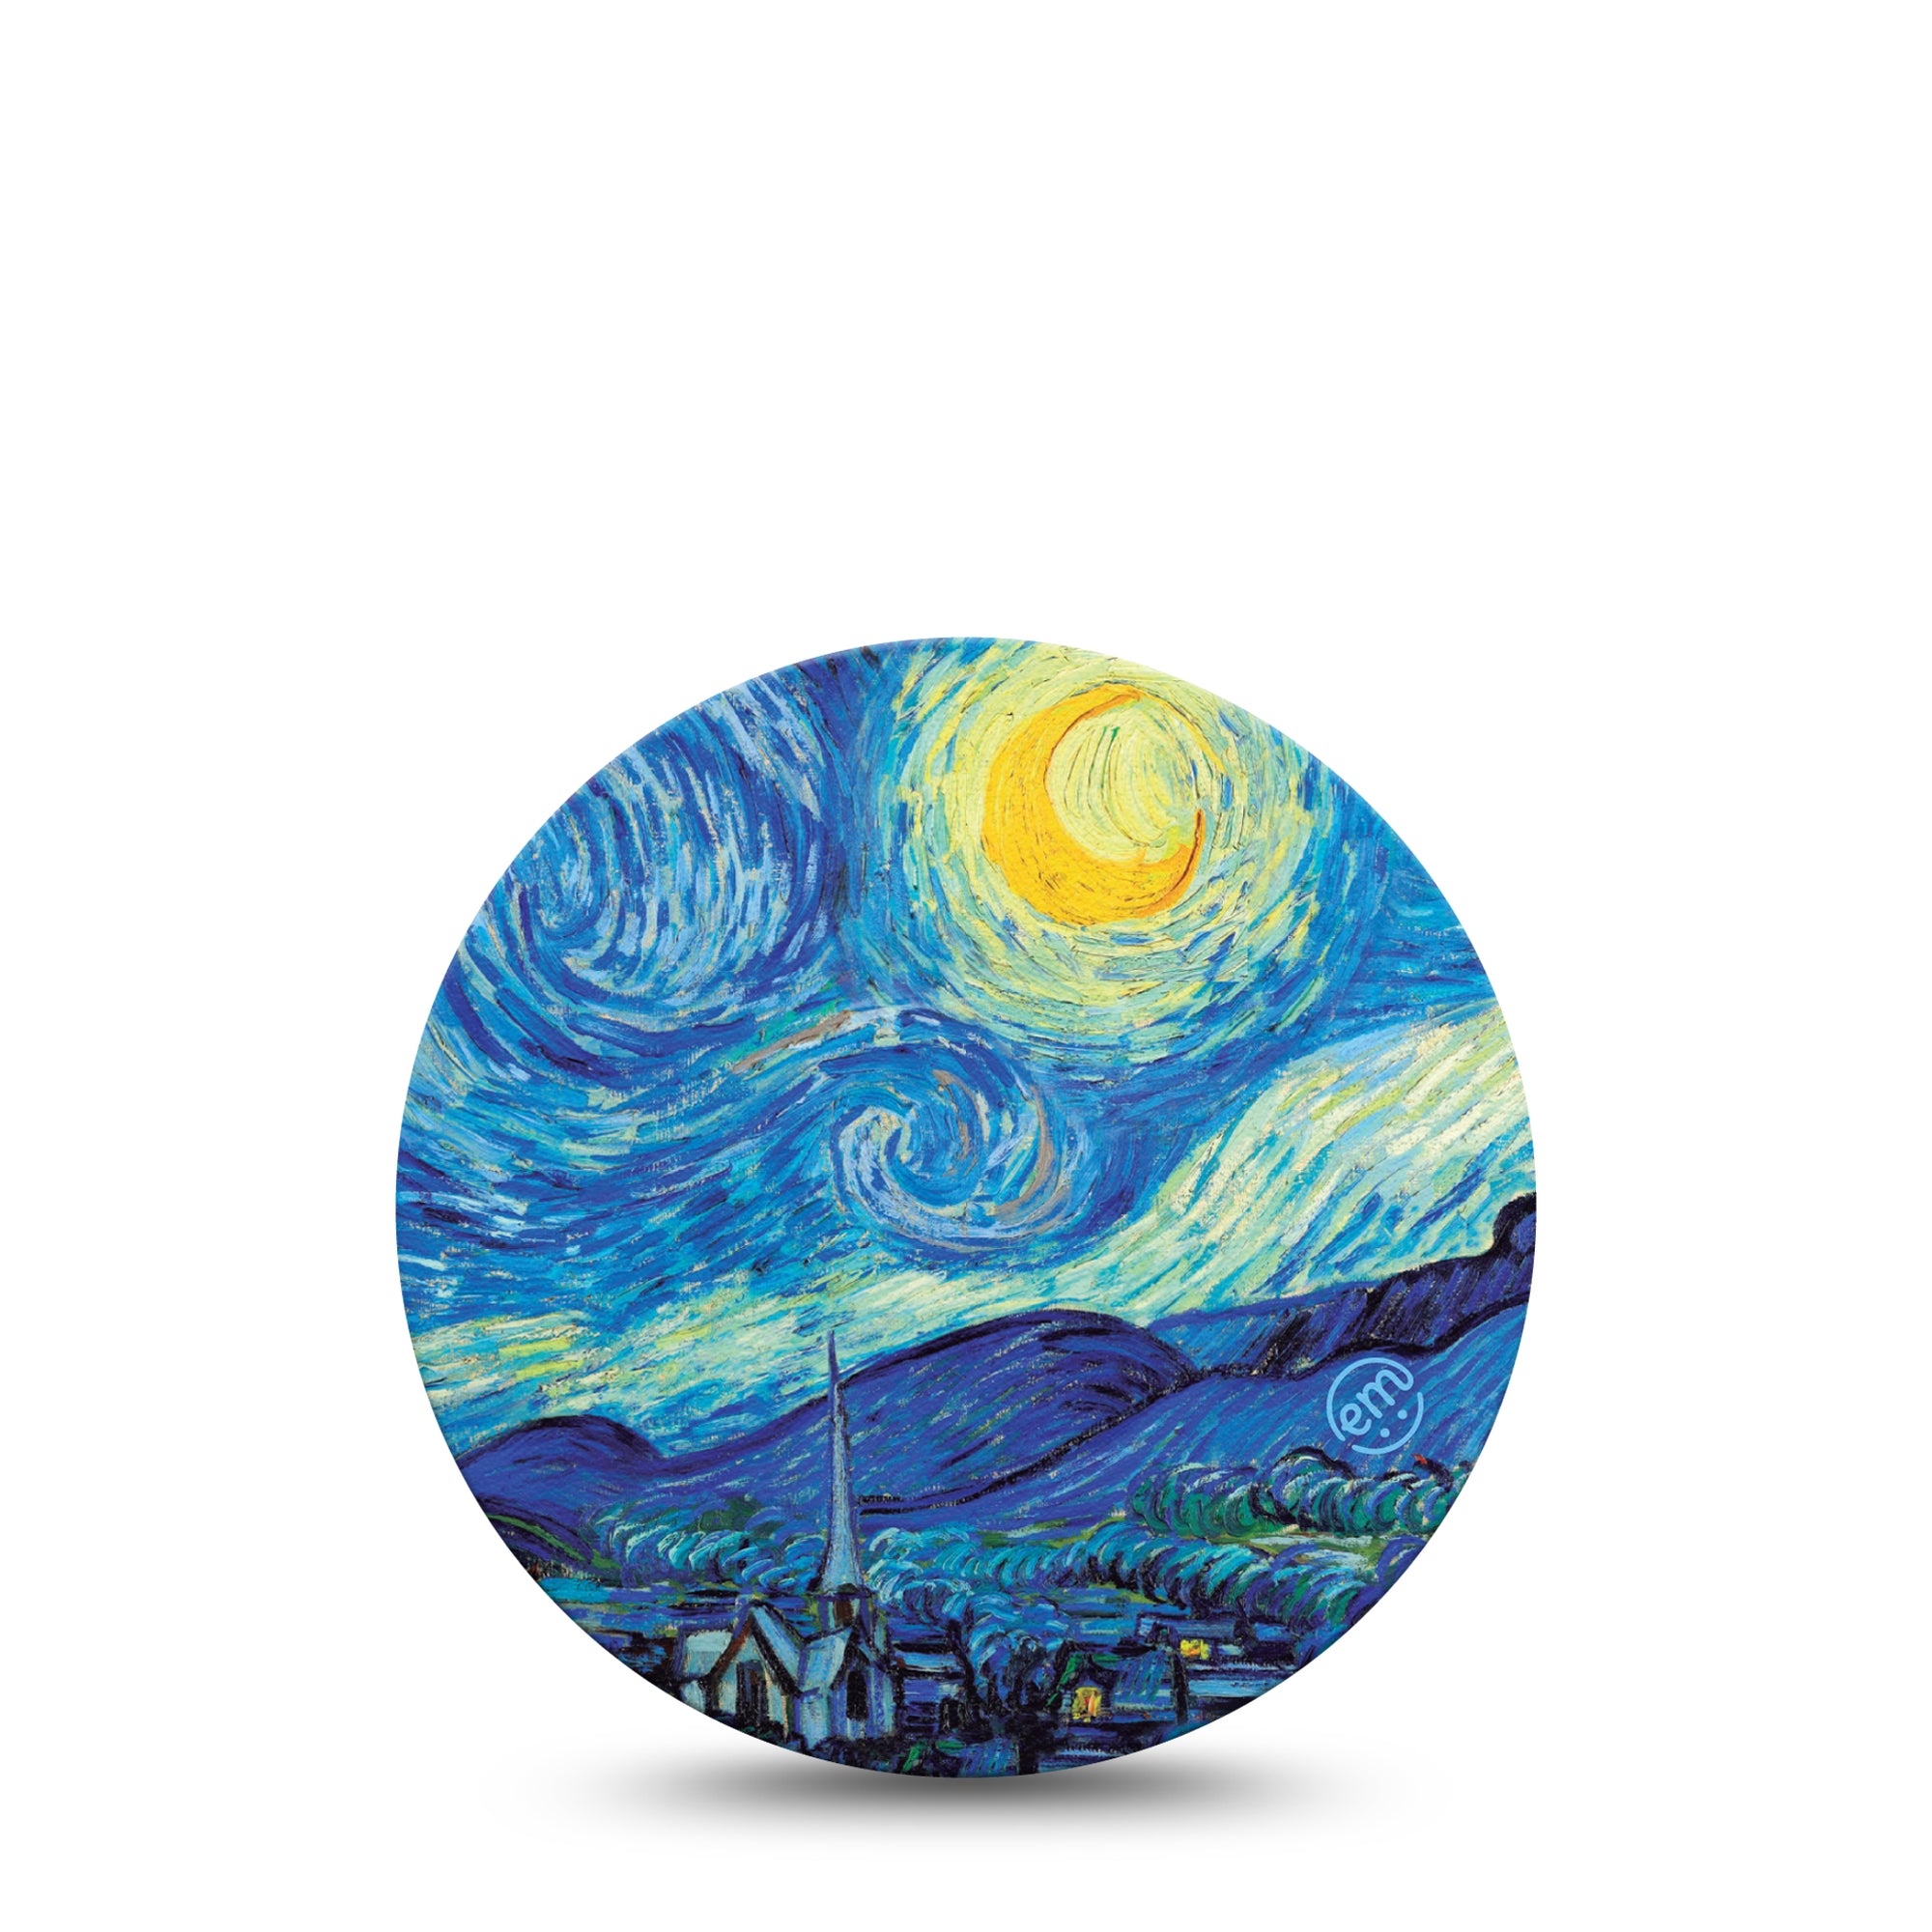 Starry Nights Libre 2 Overpatch Adhesive Patch, Single, Van Gogh Painting Inspired Design